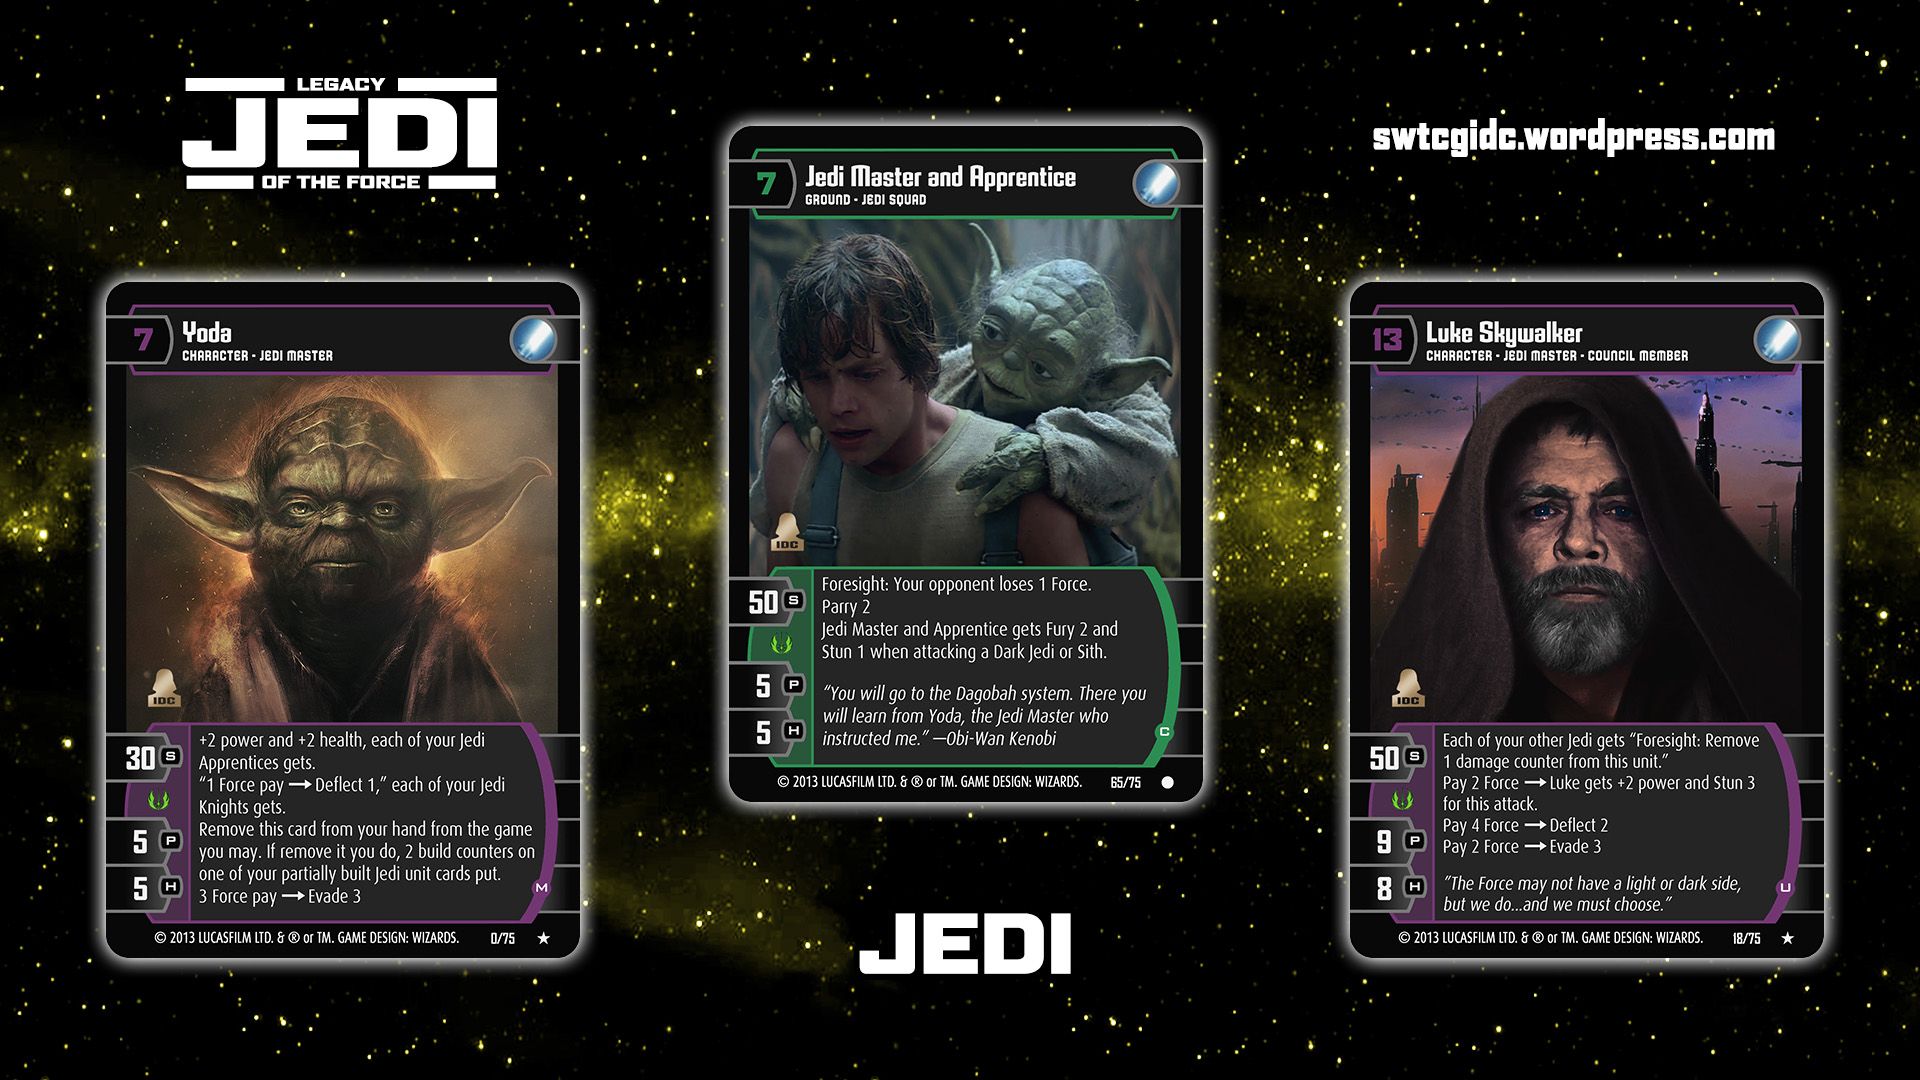 Star Wars Trading Card Game Jedi Wallpaper 3 Jedi. Star Wars Trading Card Game: Independent Development Committee